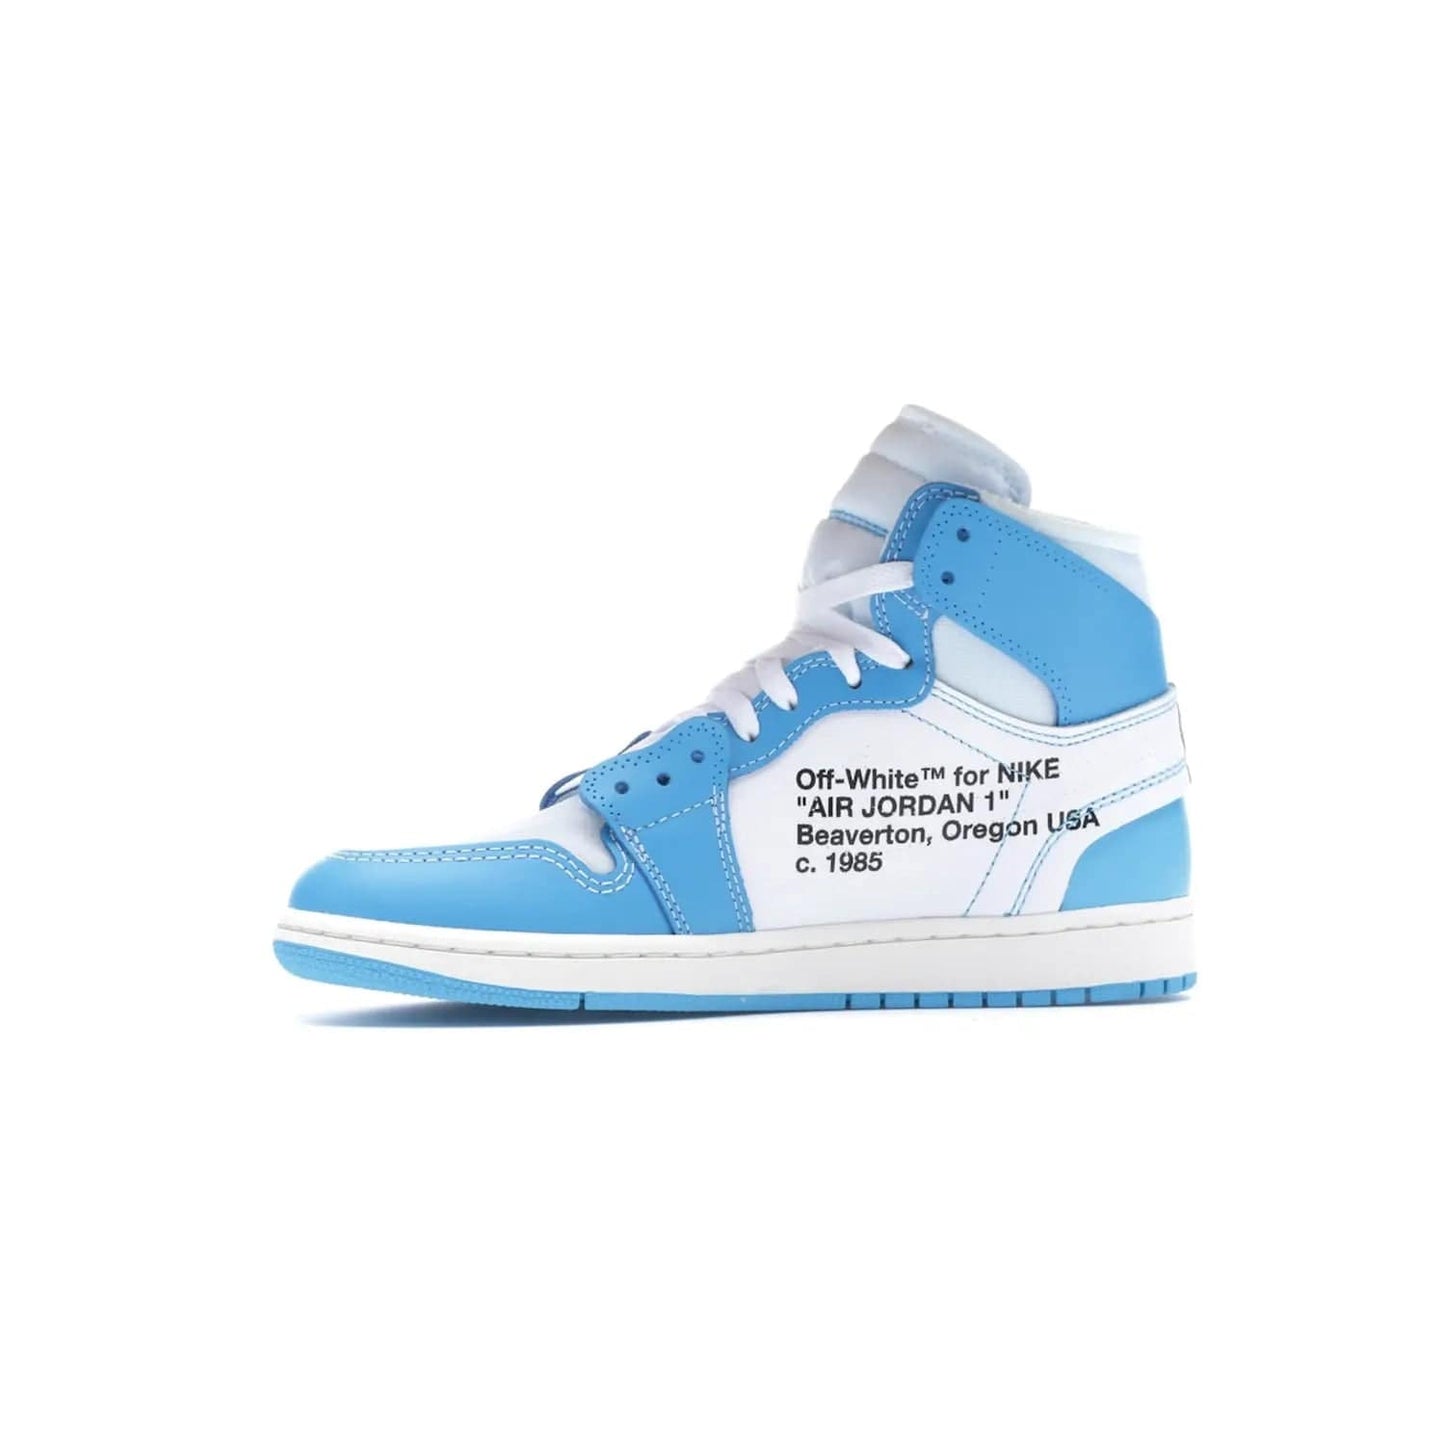 Jordan 1 Retro High Off-White University Blue - Image 18 - Only at www.BallersClubKickz.com - Classic Jordan 1 Retro High "Off-White UNC" sneakers meld style and comfort. Boasting deconstructed white and blue leather, Off-White detailing, and a white, dark powder blue and cone colorway, these sneakers are perfect for dressing up or down. Get the iconic Off-White Jordan 1's and upgrade your look.